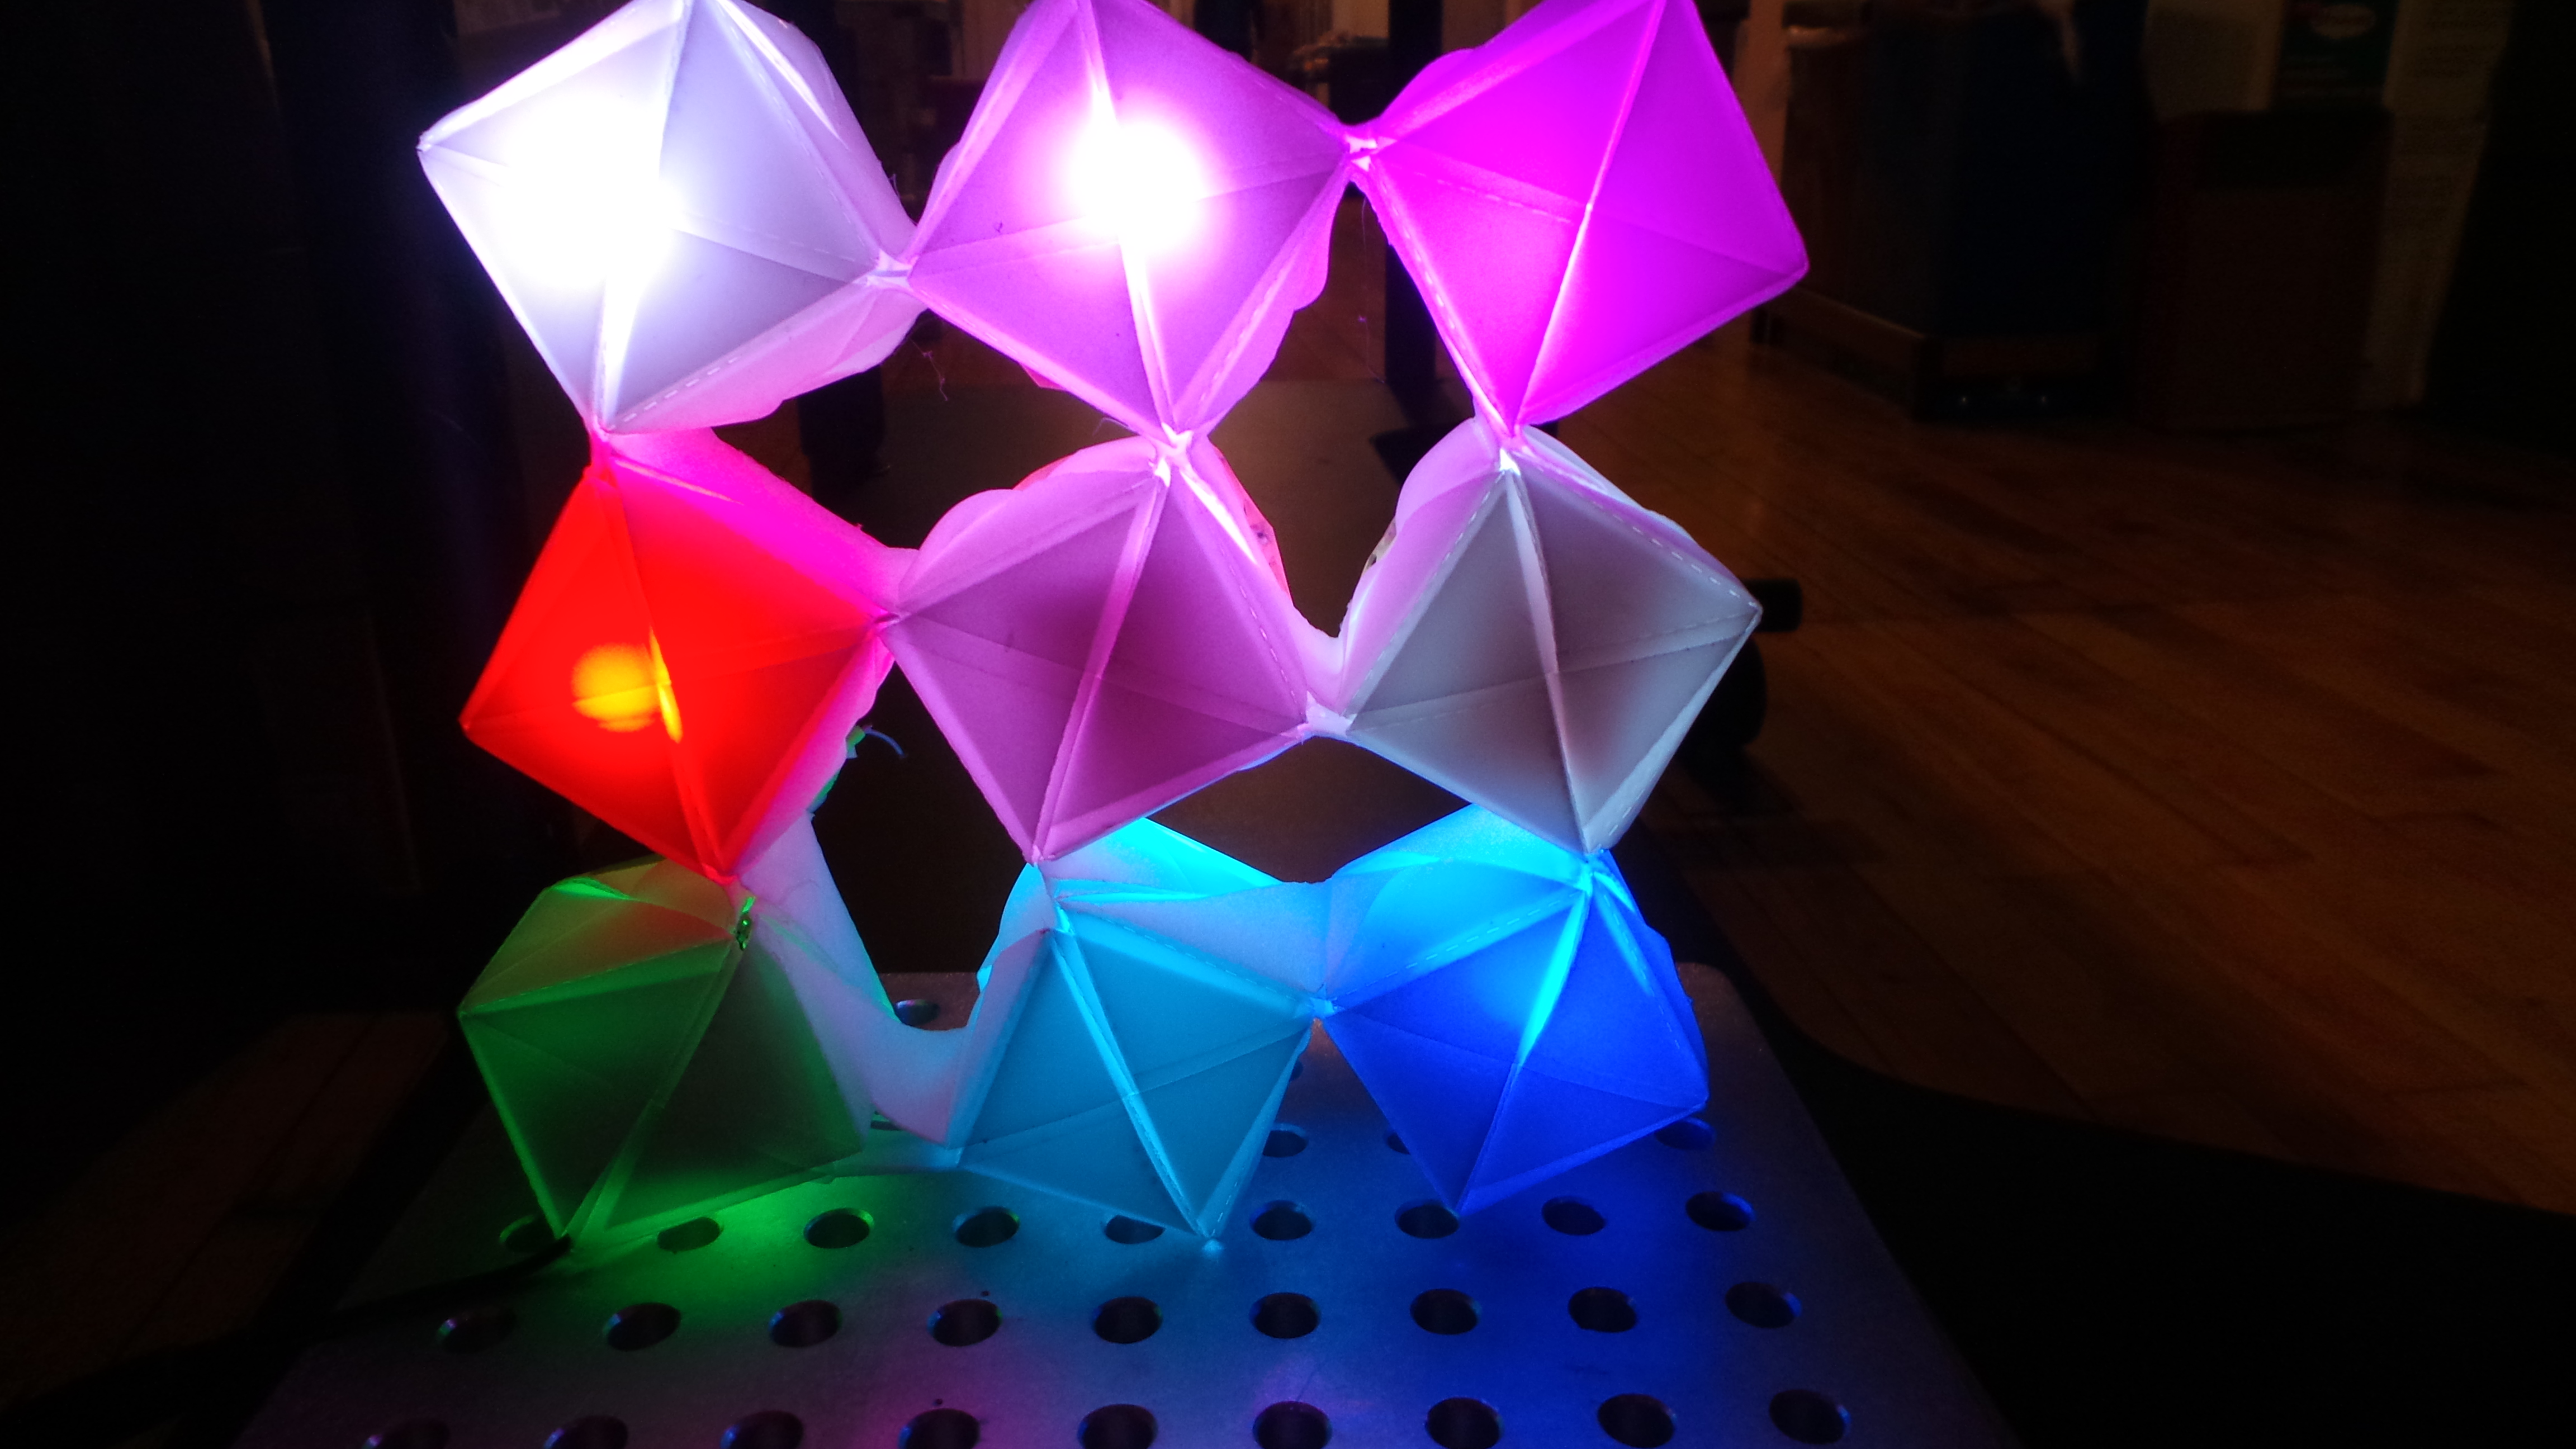 Interactive modular origami lights that responds to change in physical arrangement.